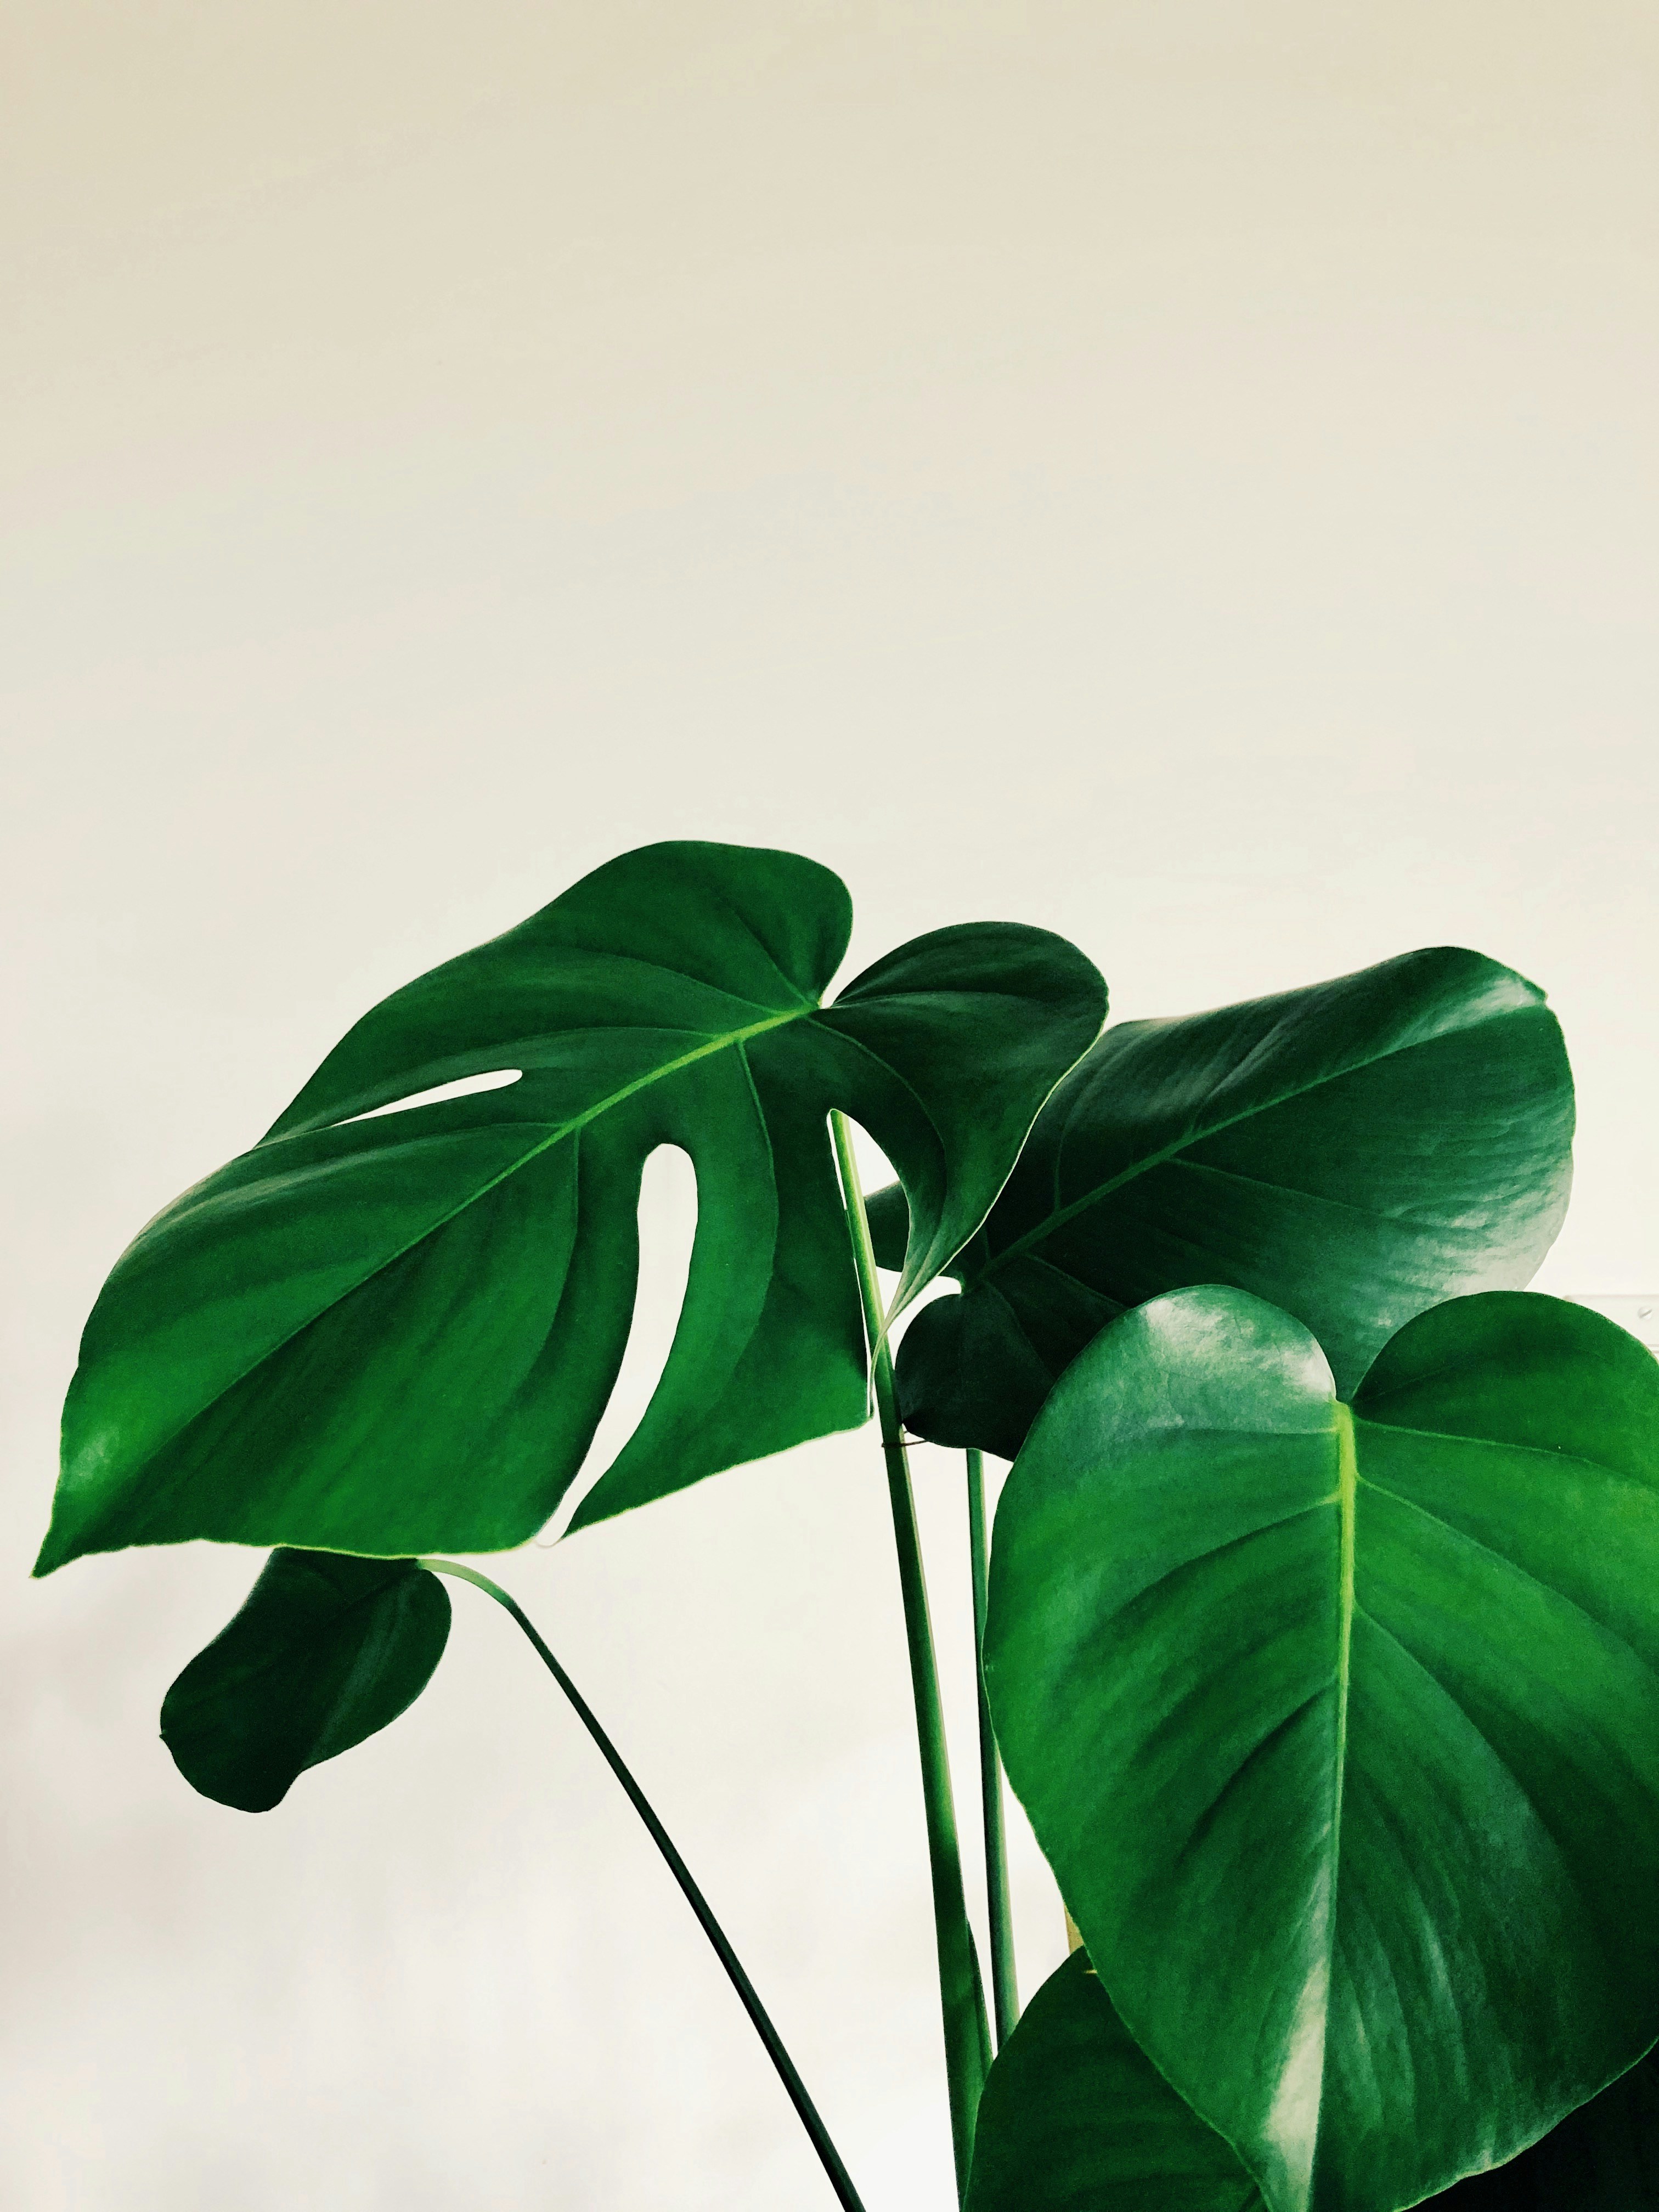 Choose from a curated selection of leaf backgrounds. Always free on Unsplash.